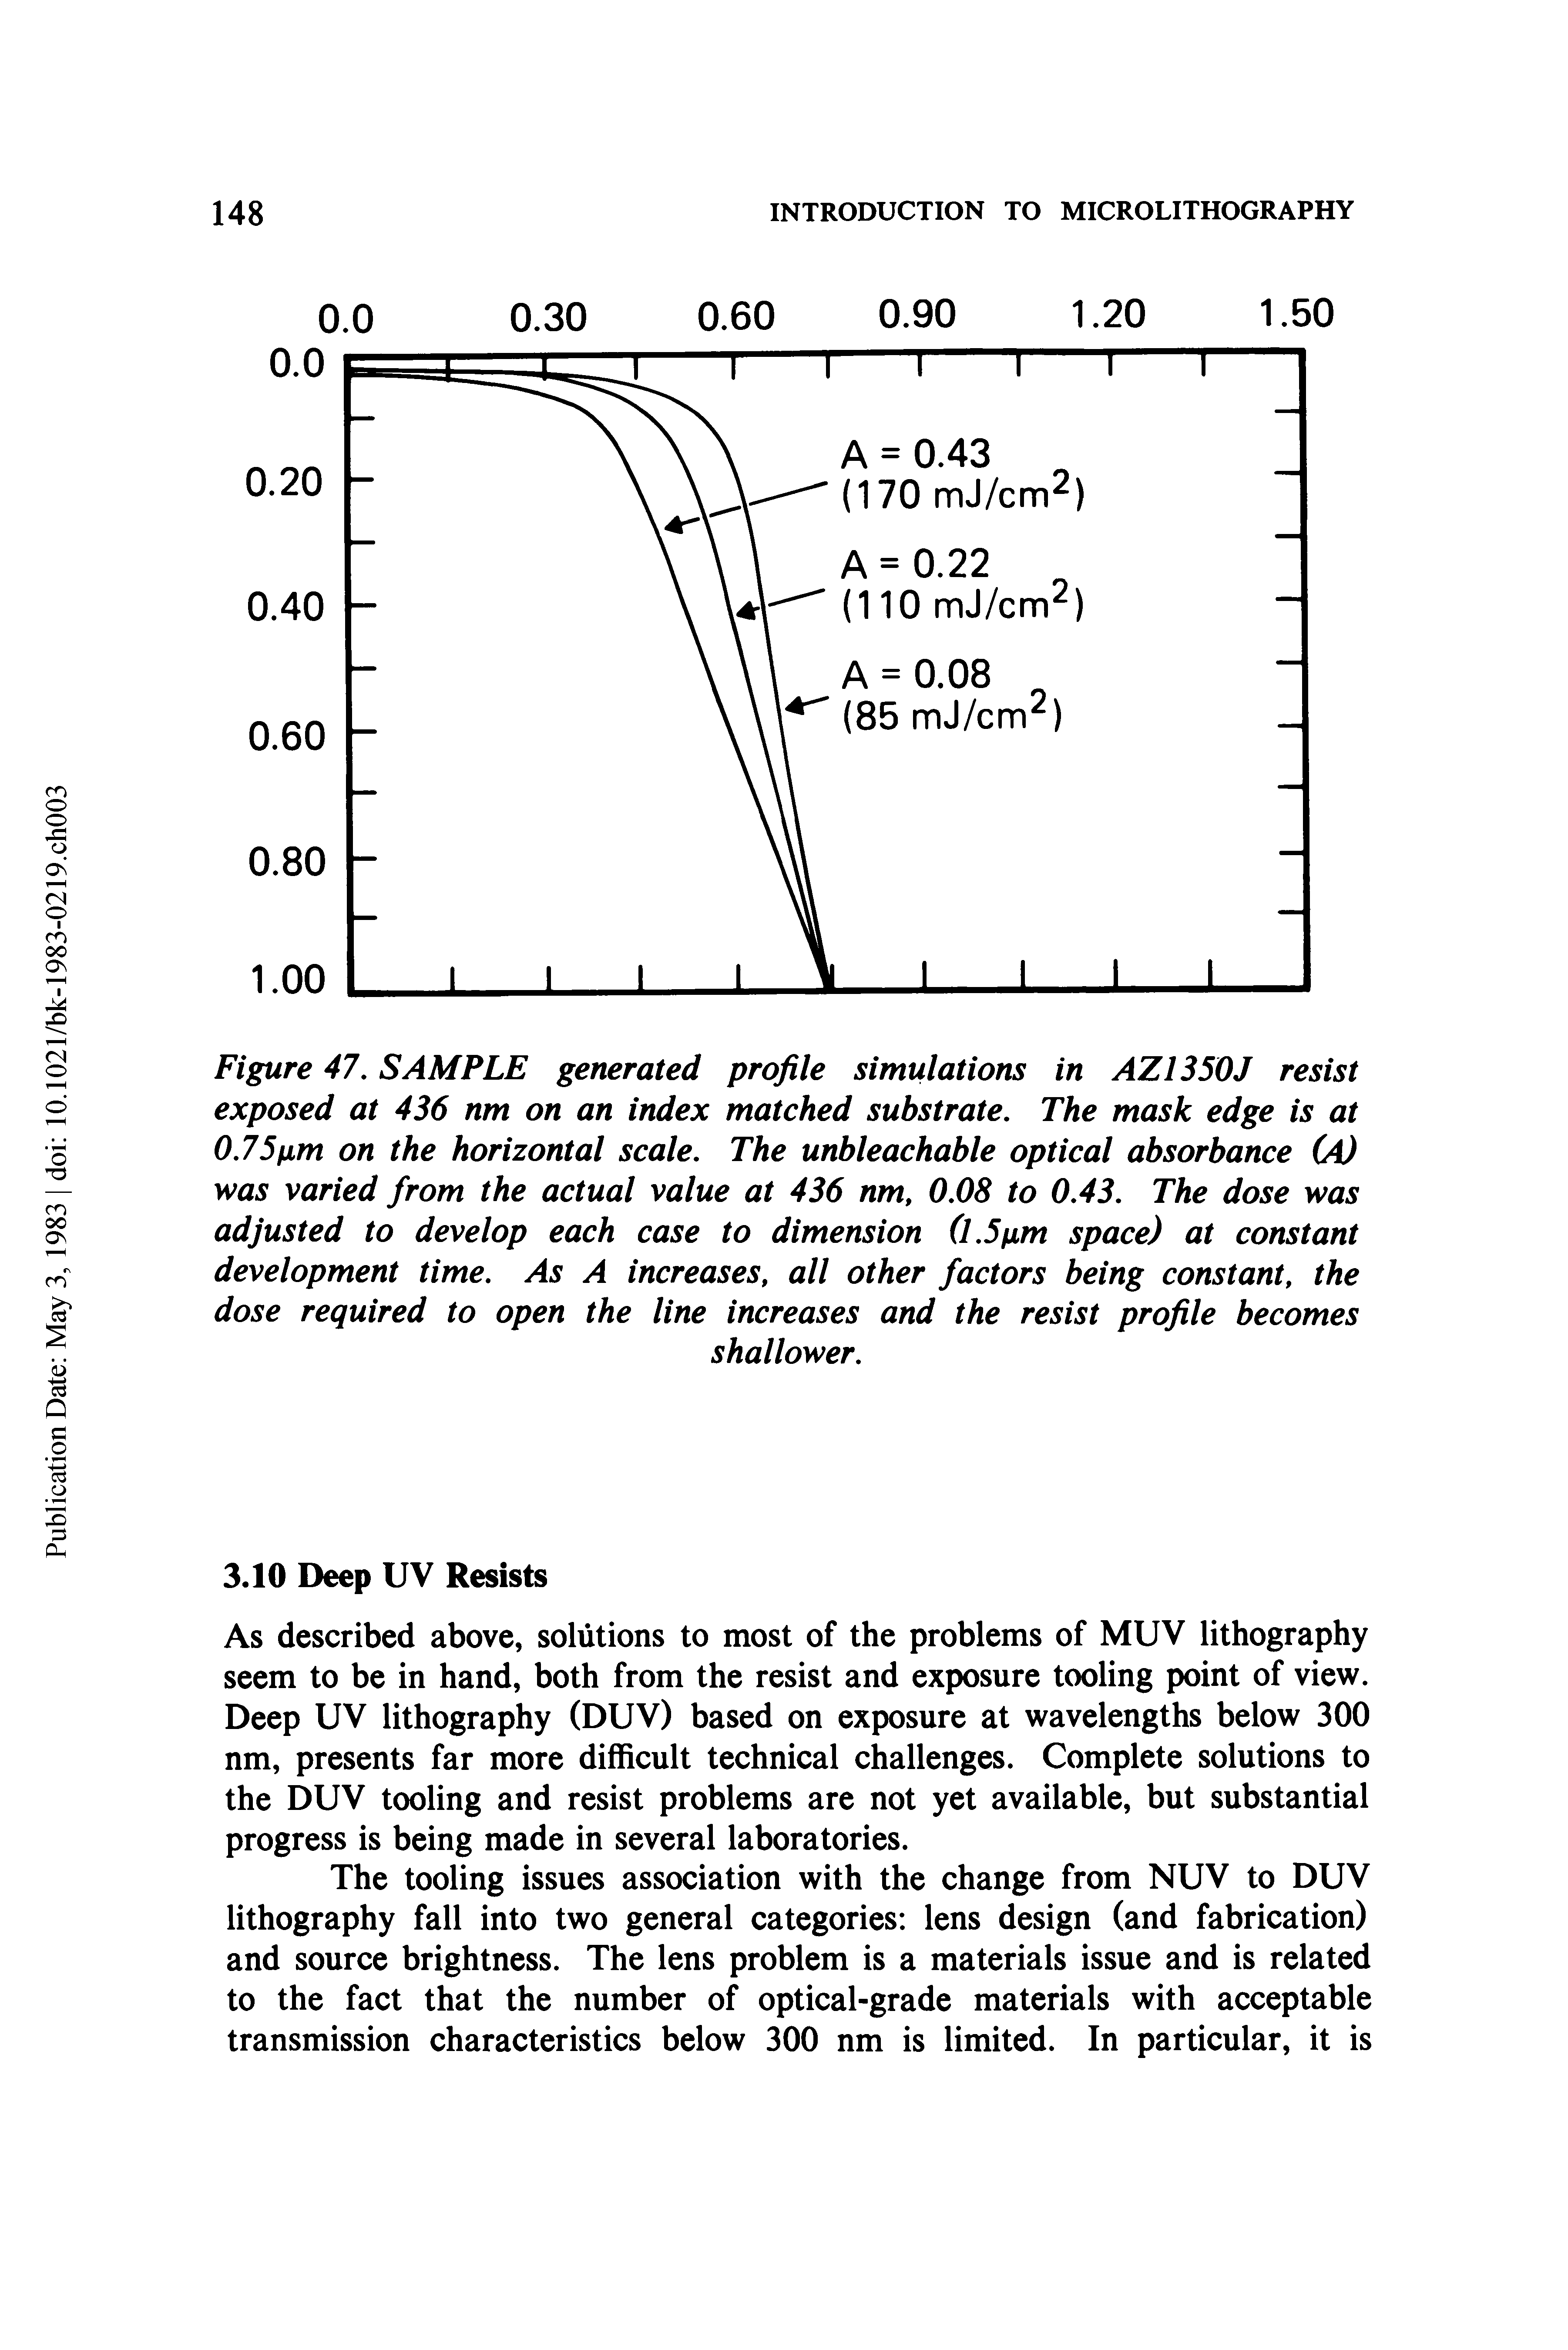 Figure 47, SAMPLE generated profile simulations in AZ1350J resist exposed at 436 nm on an index matched substrate. The mask edge is at 0.75um on the horizontal scale. The unbleachable optical absorbance (A) was varied from the actual value at 436 nm, 0.08 to 0.43. The dose was adjusted to develop each case to dimension (l.5um space) at constant development time. As A increases, all other factors being constant, the dose required to open the line increases and the resist profile becomes...